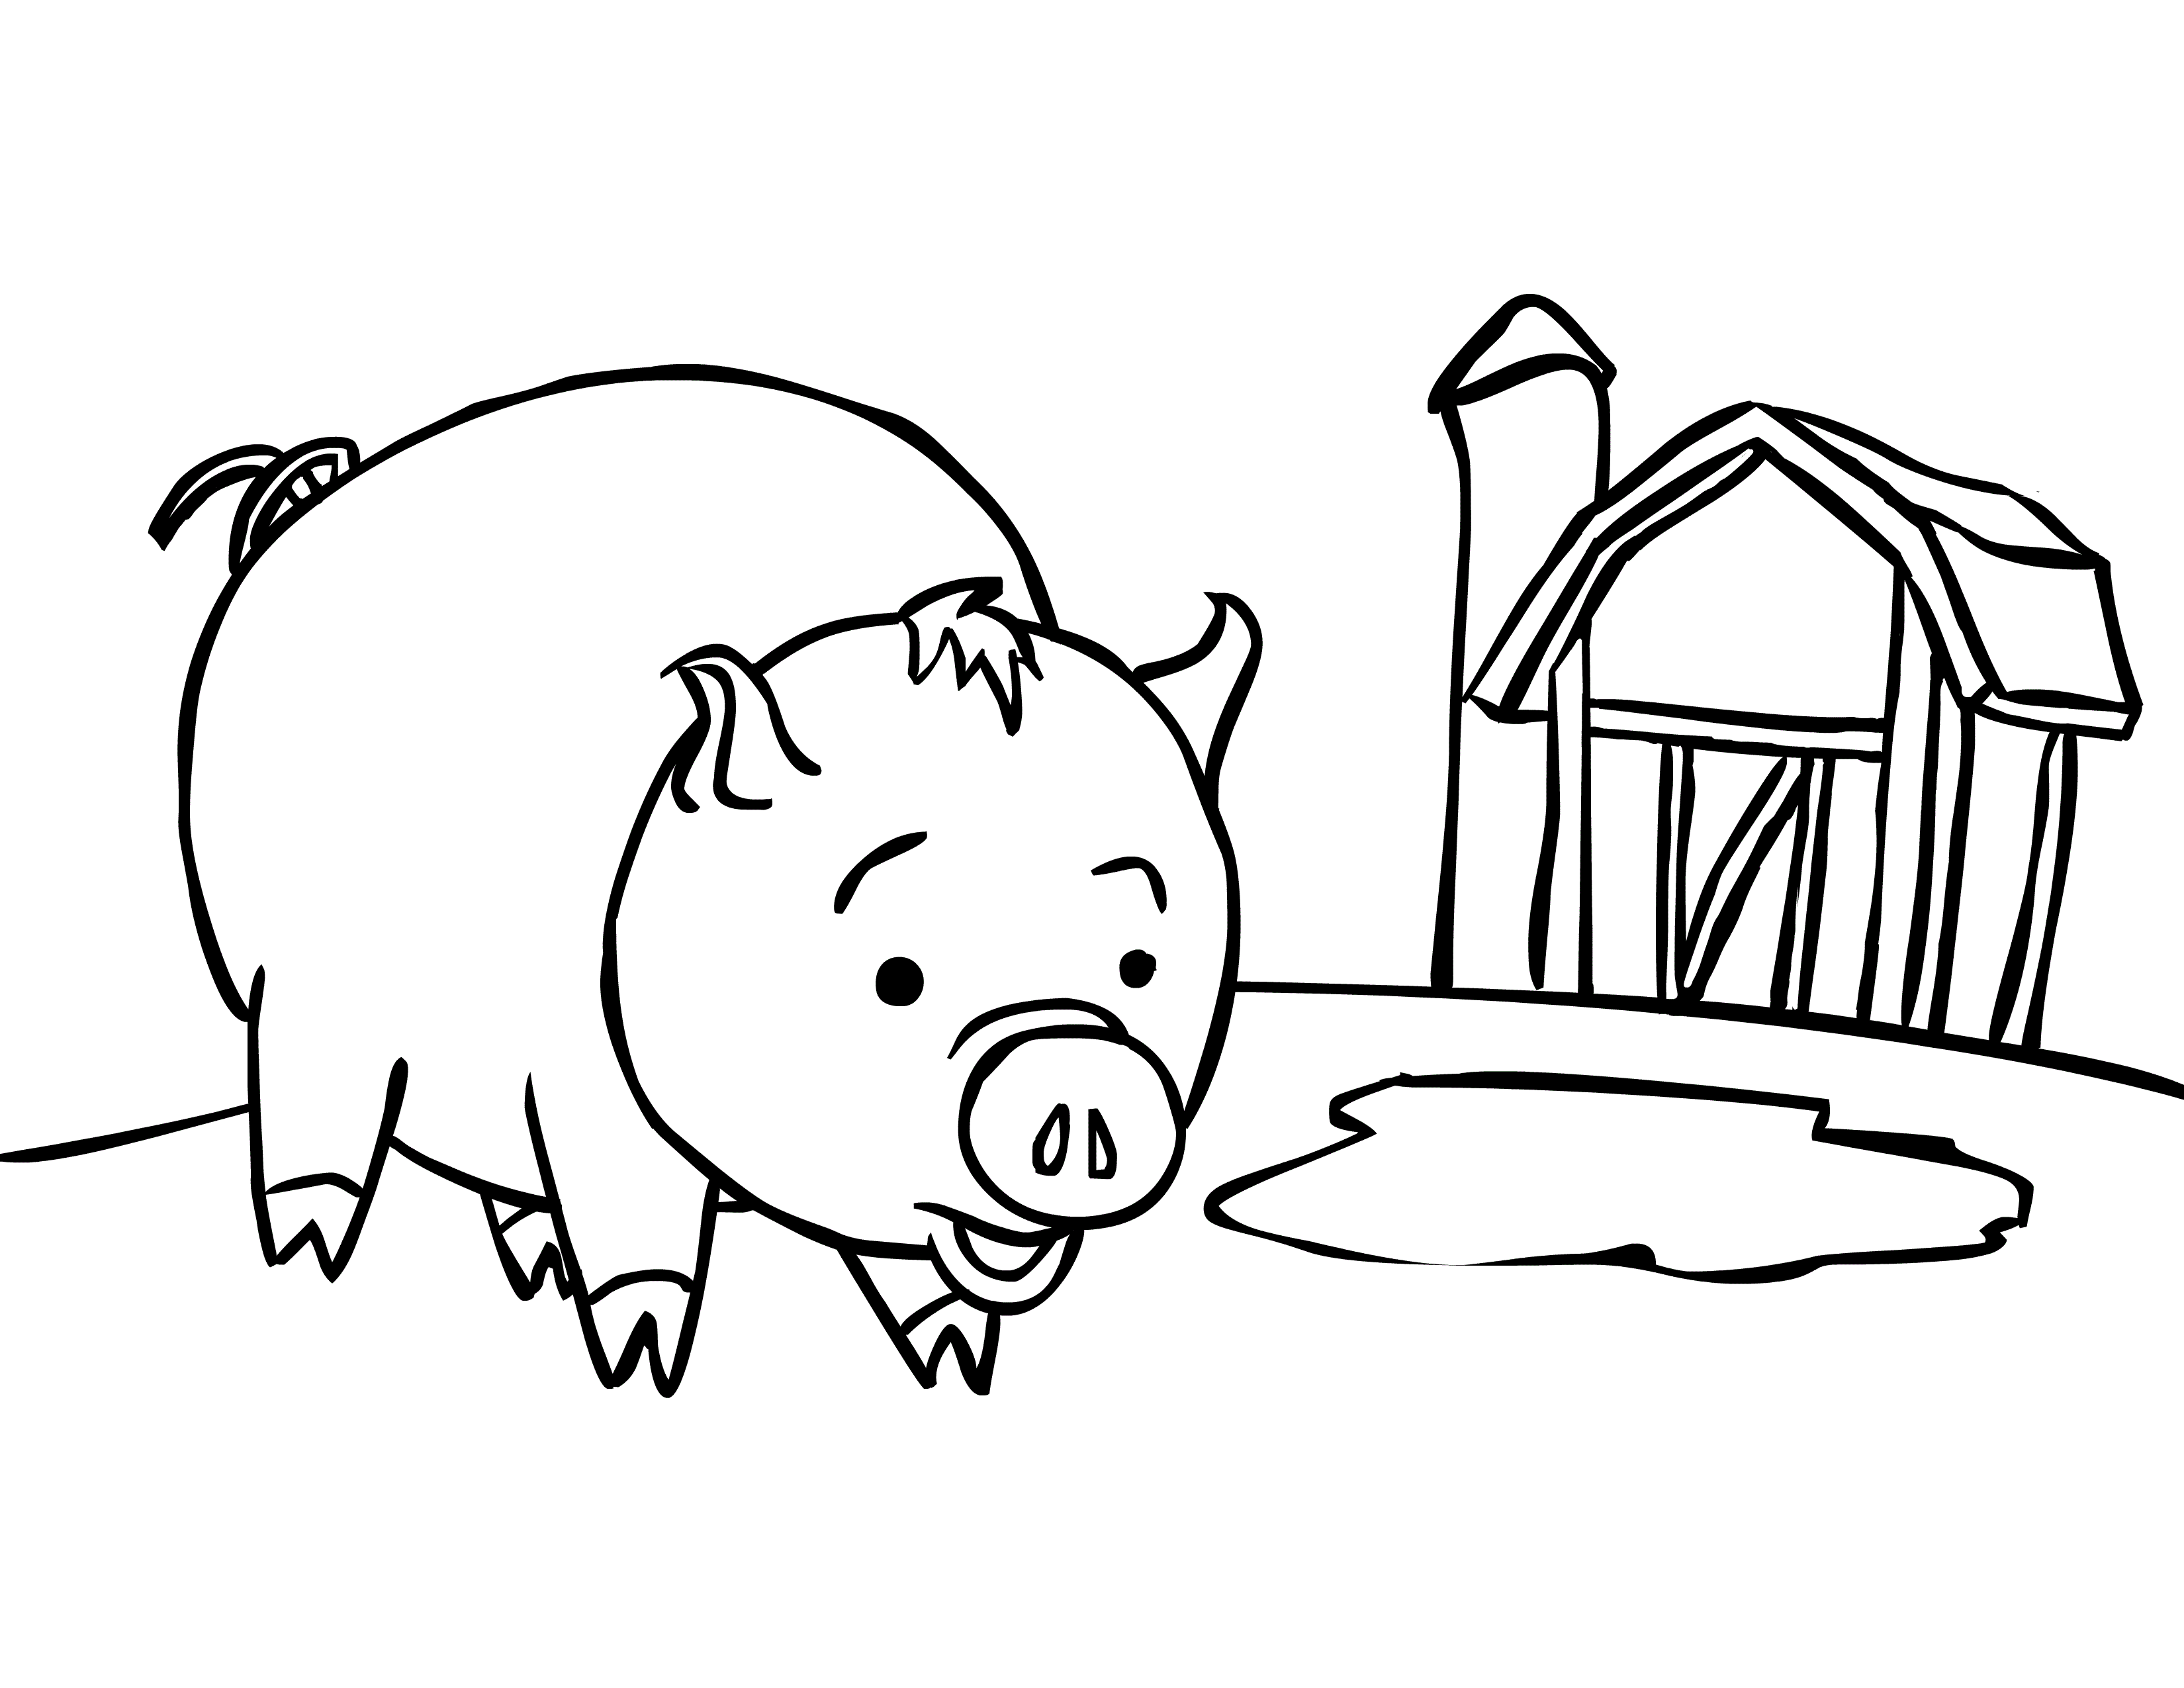 Pig Colouring Sheet : Pig Head Coloring Pages. Pig Coloring Pages ...